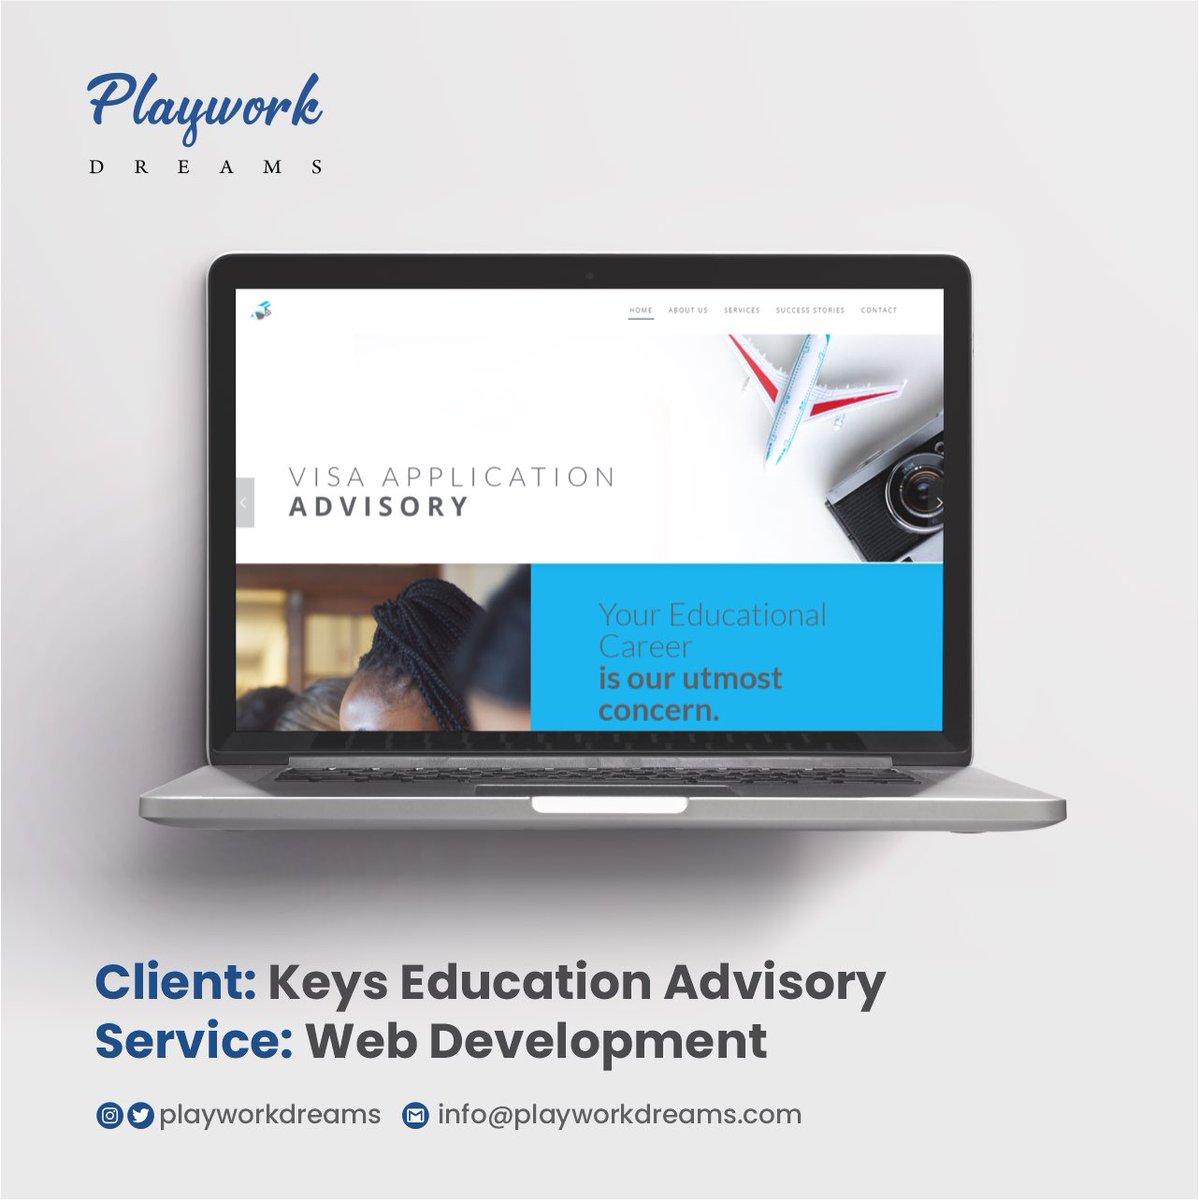 Our Client : Keys Education Advisory 
Service Provided : Web Development 

We create a website that is tailor made to your needs as well as to content writing that helps your business or brand compete on a global level. 

Reach out to us today for a revamp!

#pwdagency